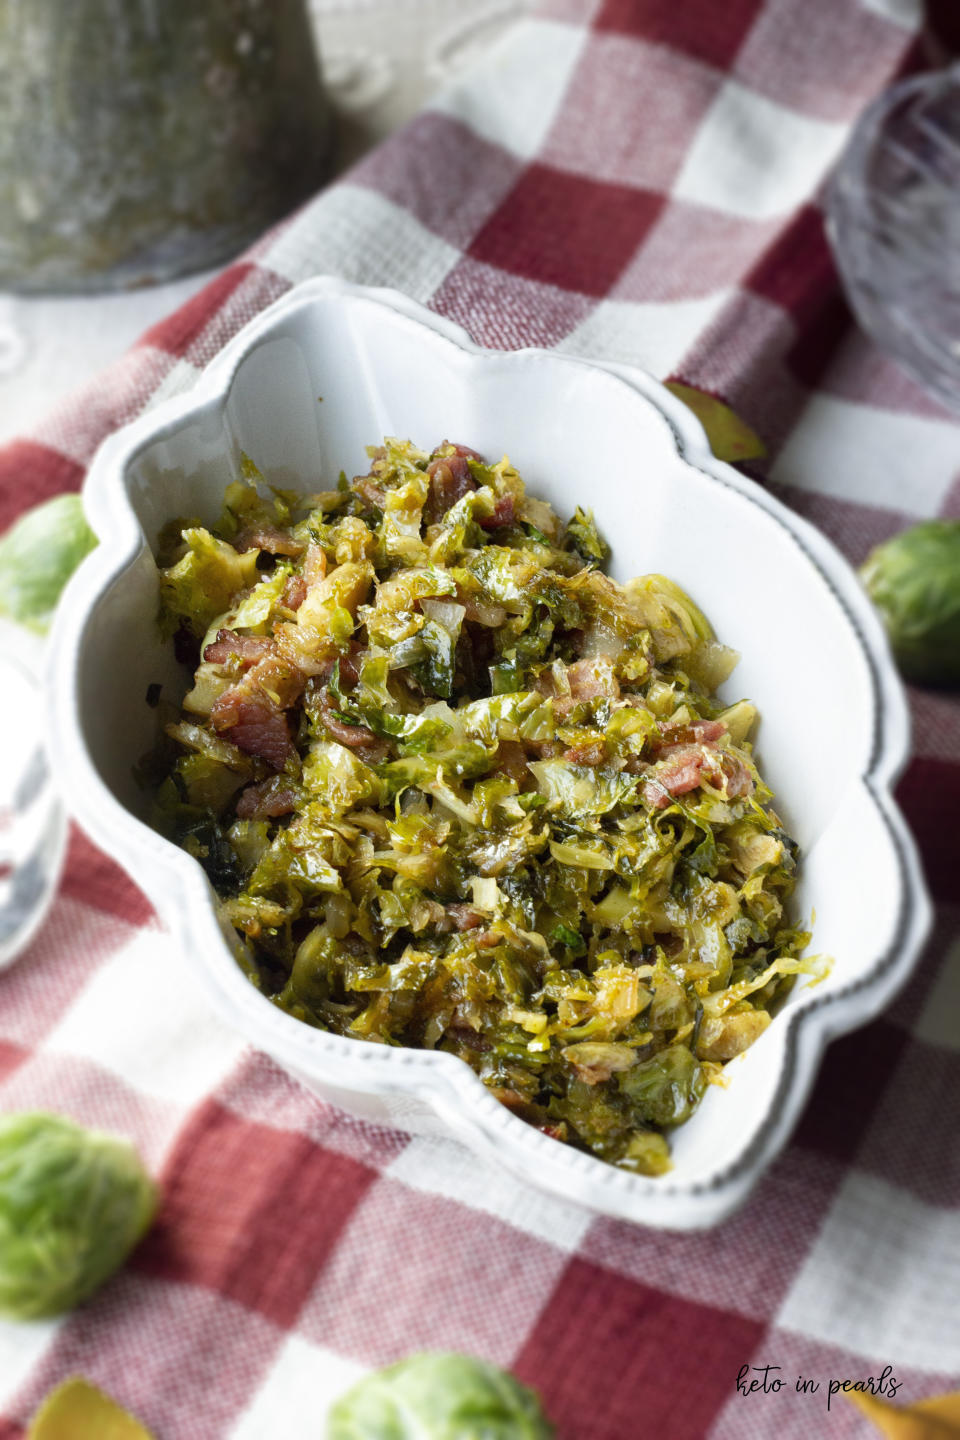 <strong>Get the </strong><a href="https://ketoinpearls.com/brussel-sprouts-bacon-brown-sugar/"><strong>Shaved Brussel Sprouts with Bacon and Brown Sugar recipe</strong></a><strong> from Keto In Pearls</strong>